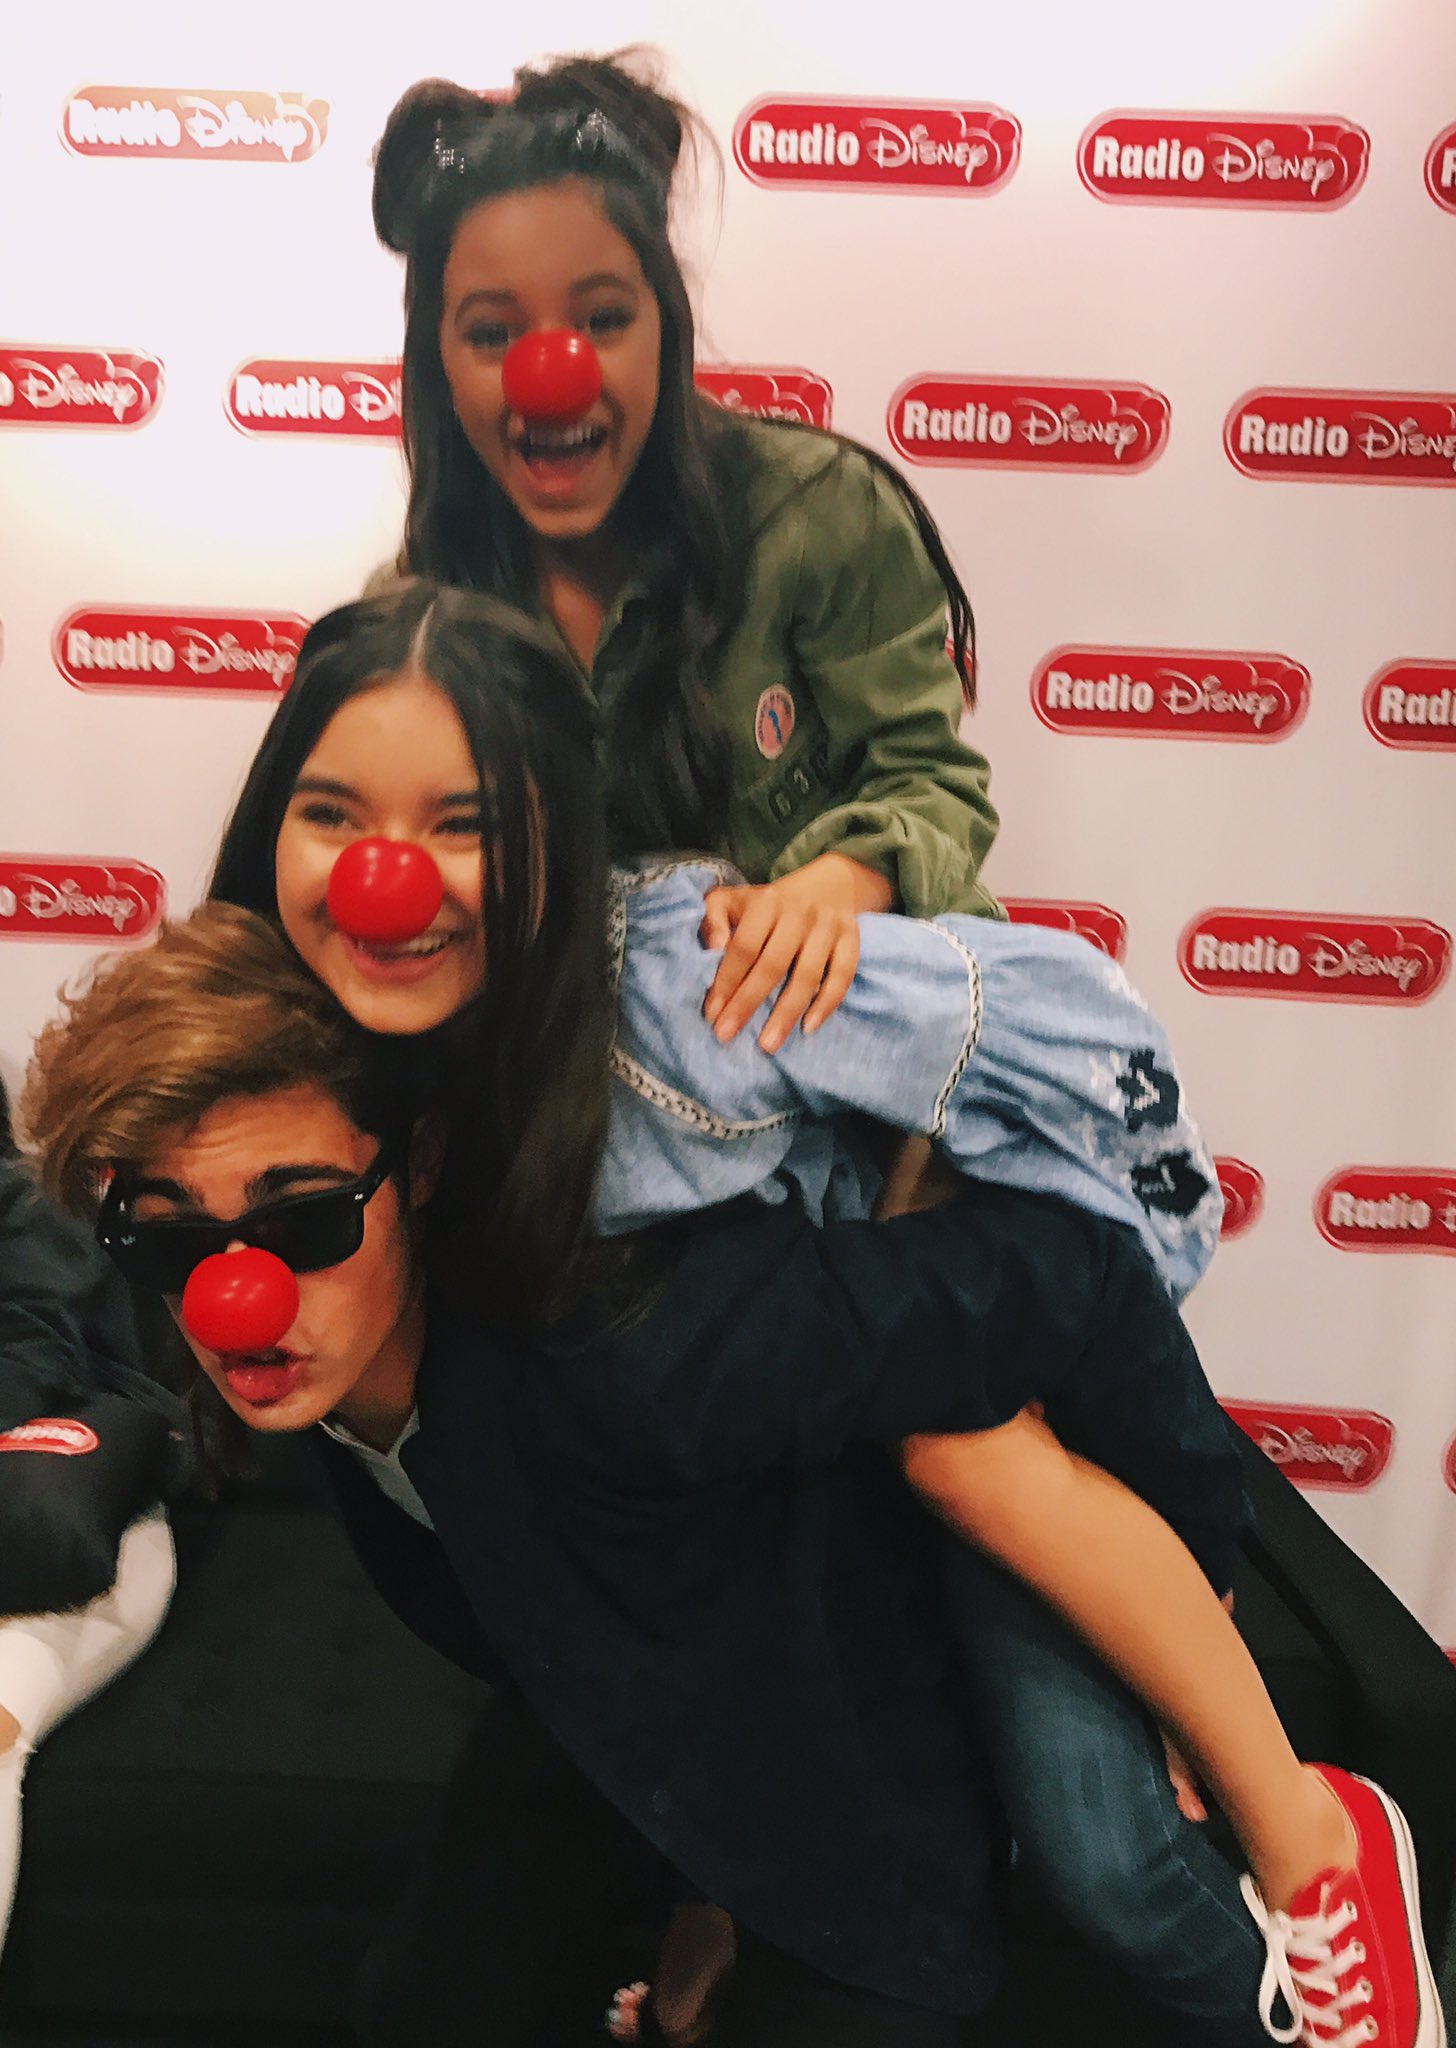 Landry Bender on Twitter: "Happy #RedNoseDayUSA! 🔴 #RedNoseDay is on a mission to childhood poverty- you can help by going to https://t.co/SRhwntuvS6 #NosesOn 🖤 https://t.co/95jYOXdA81" / Twitter